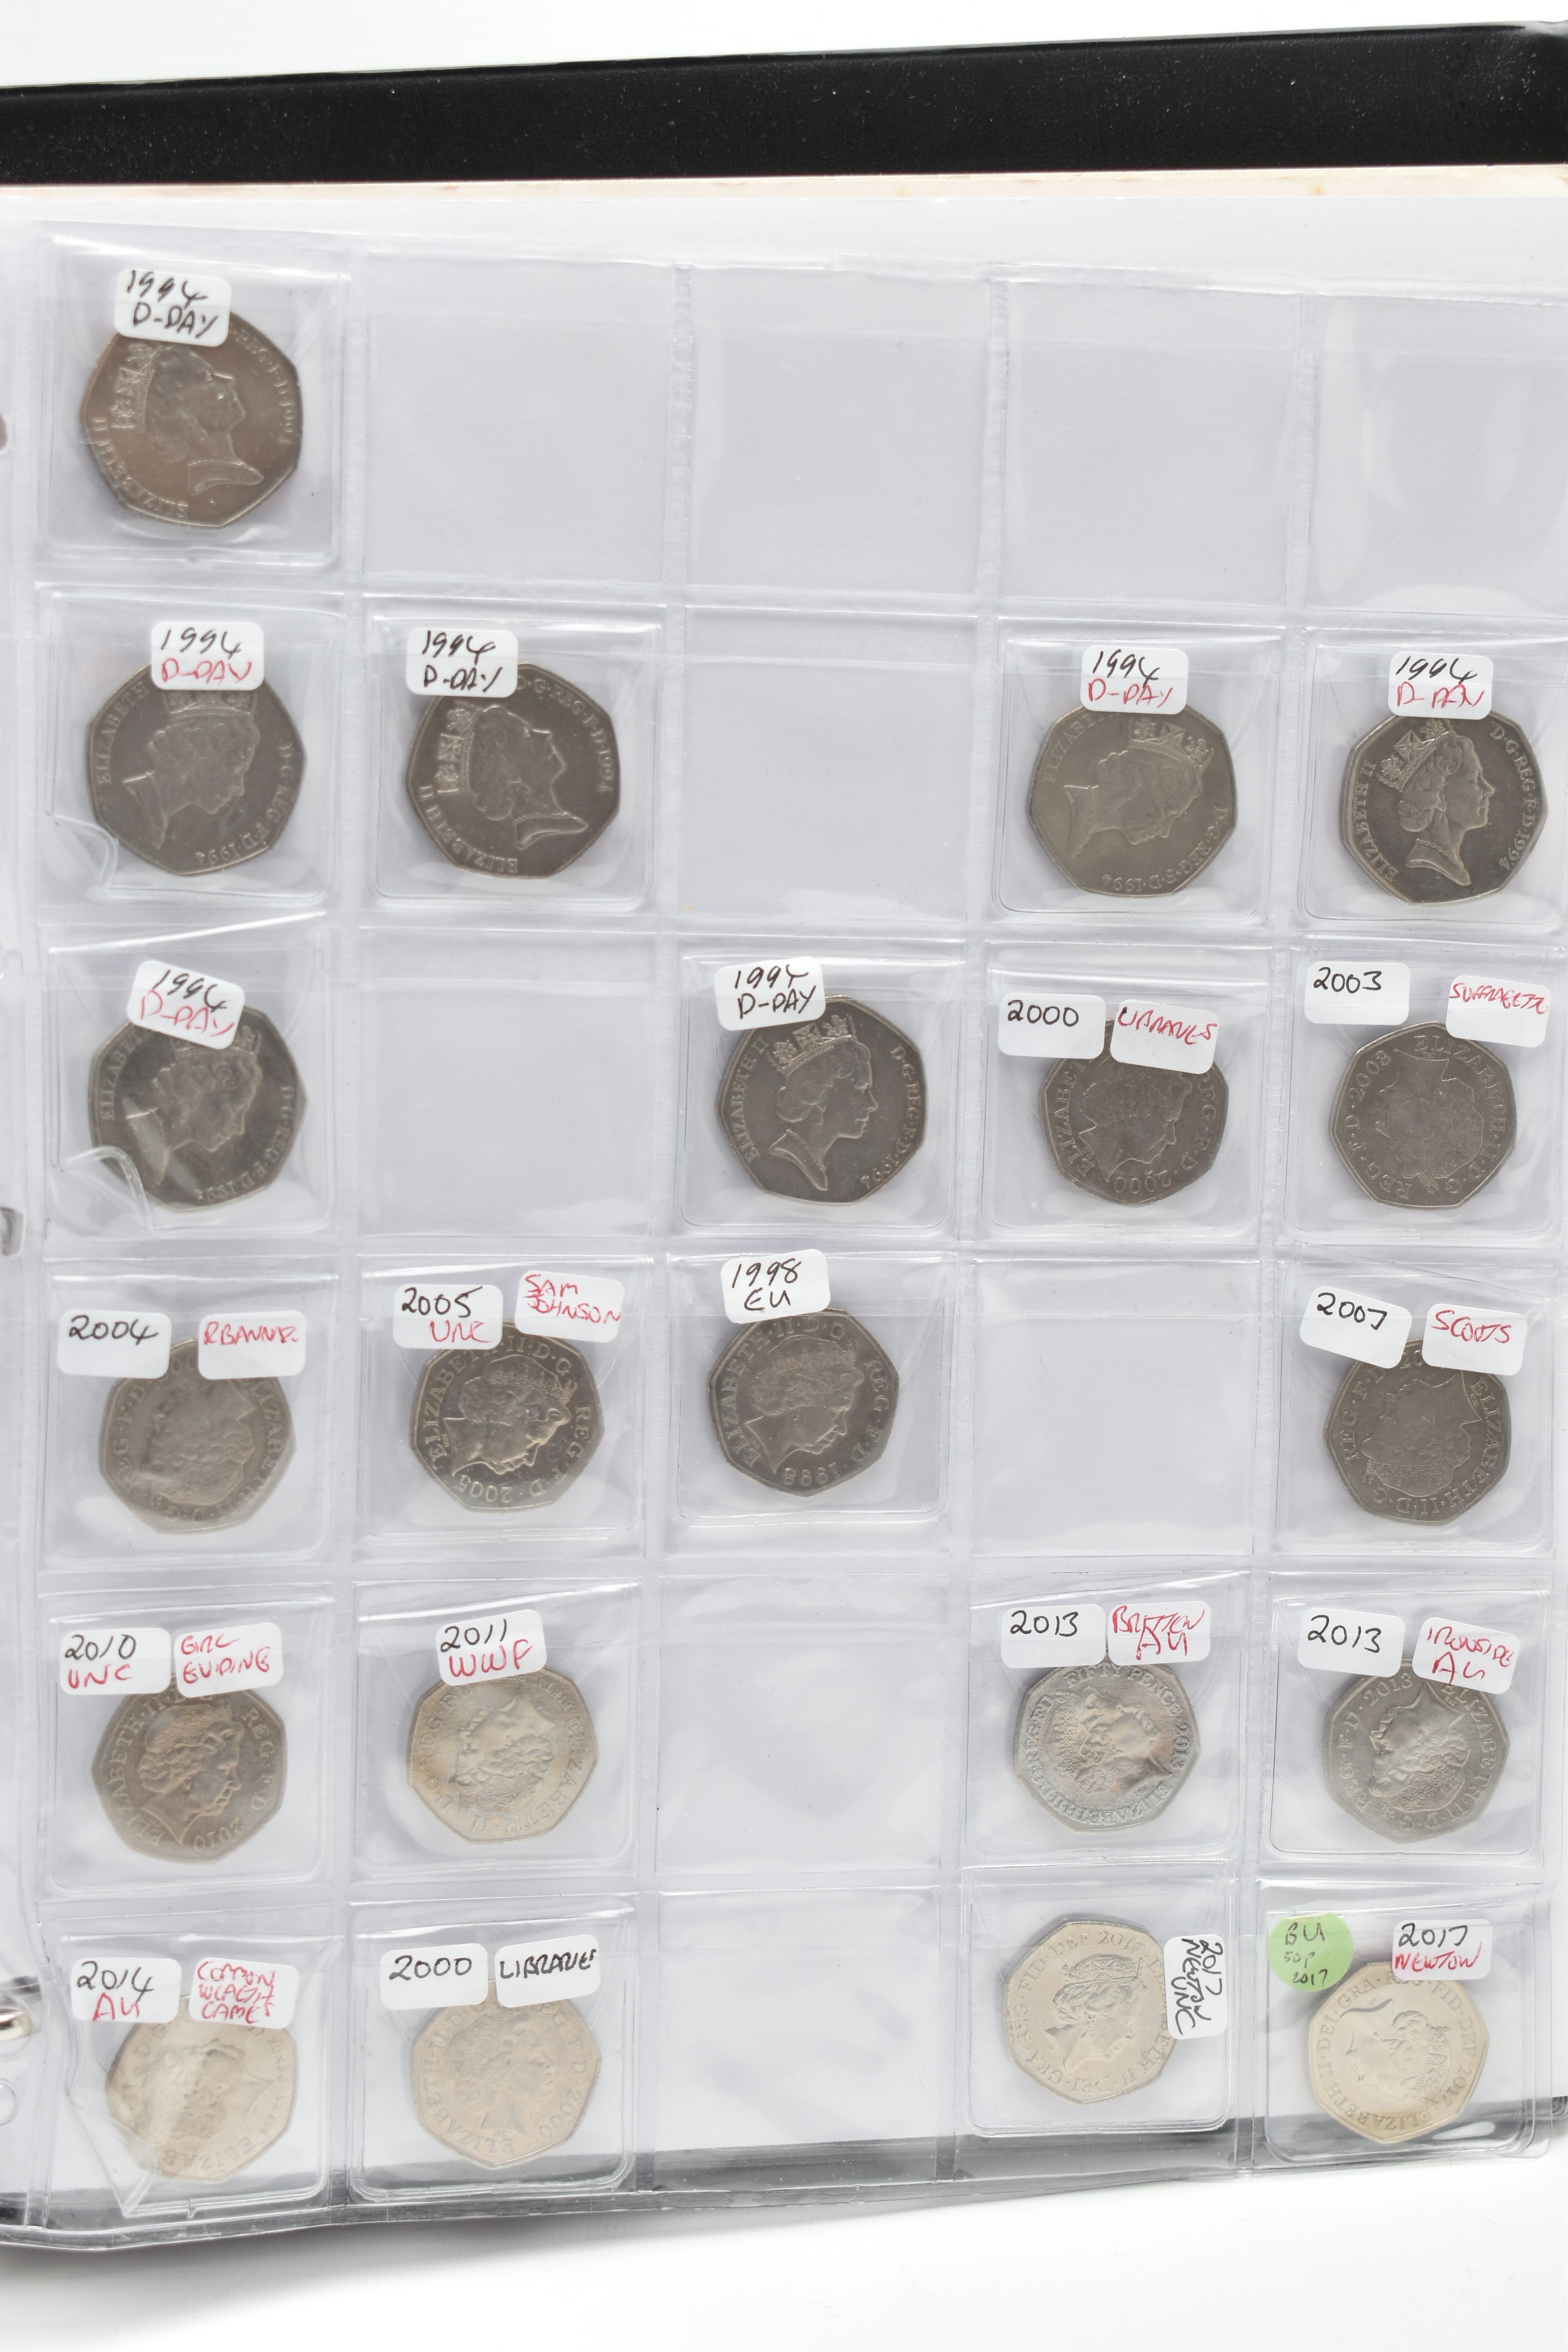 TWO COIN ALBUMS OF UK COINAGE FROM 1974-2018, to include Two Pound coins, Fifty Pence coins, with - Image 6 of 8